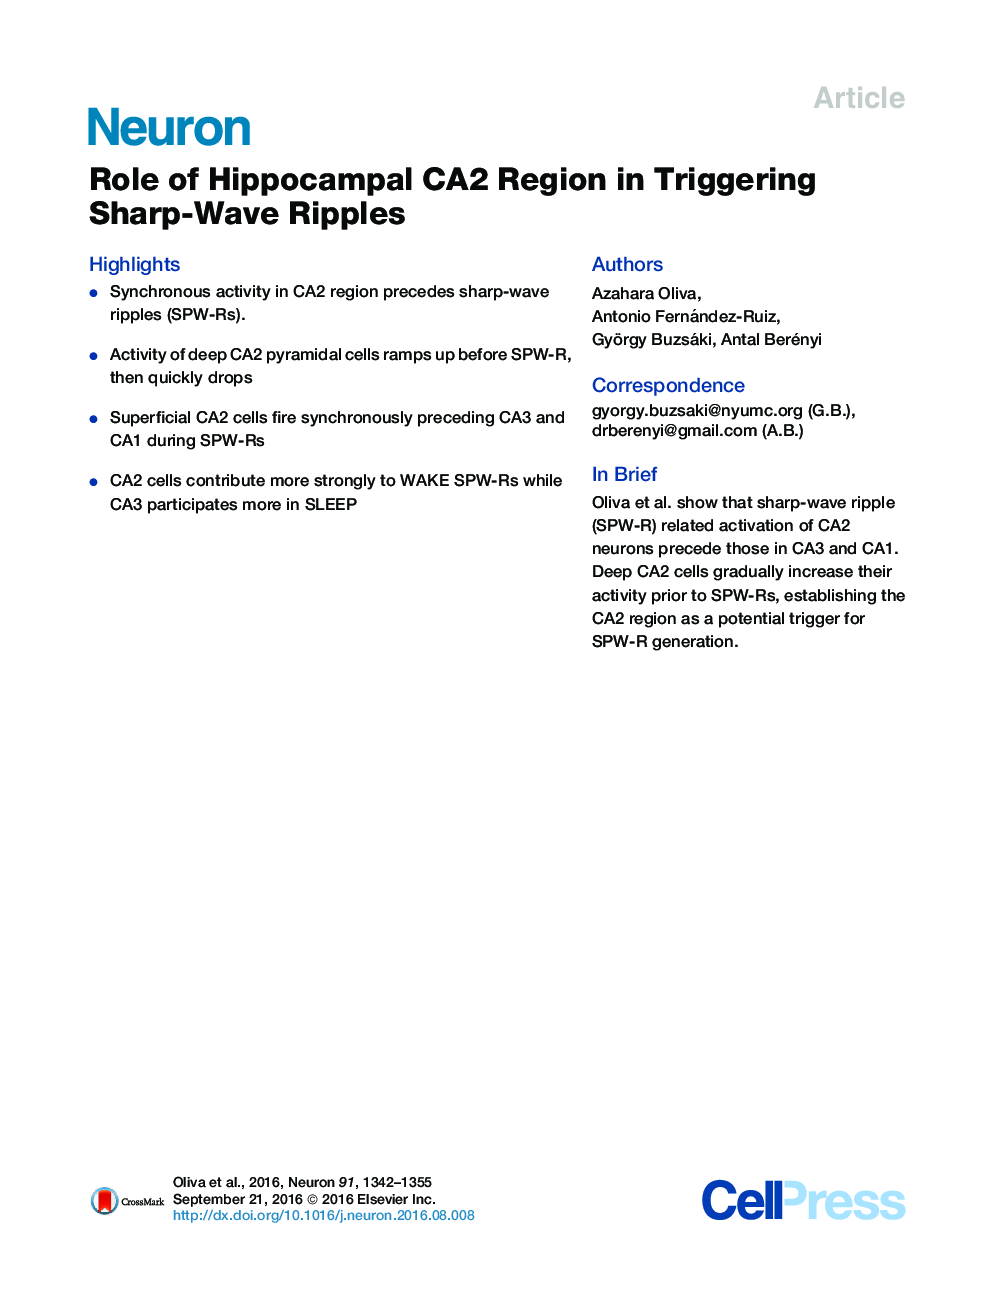 Role of Hippocampal CA2 Region in Triggering Sharp-Wave Ripples